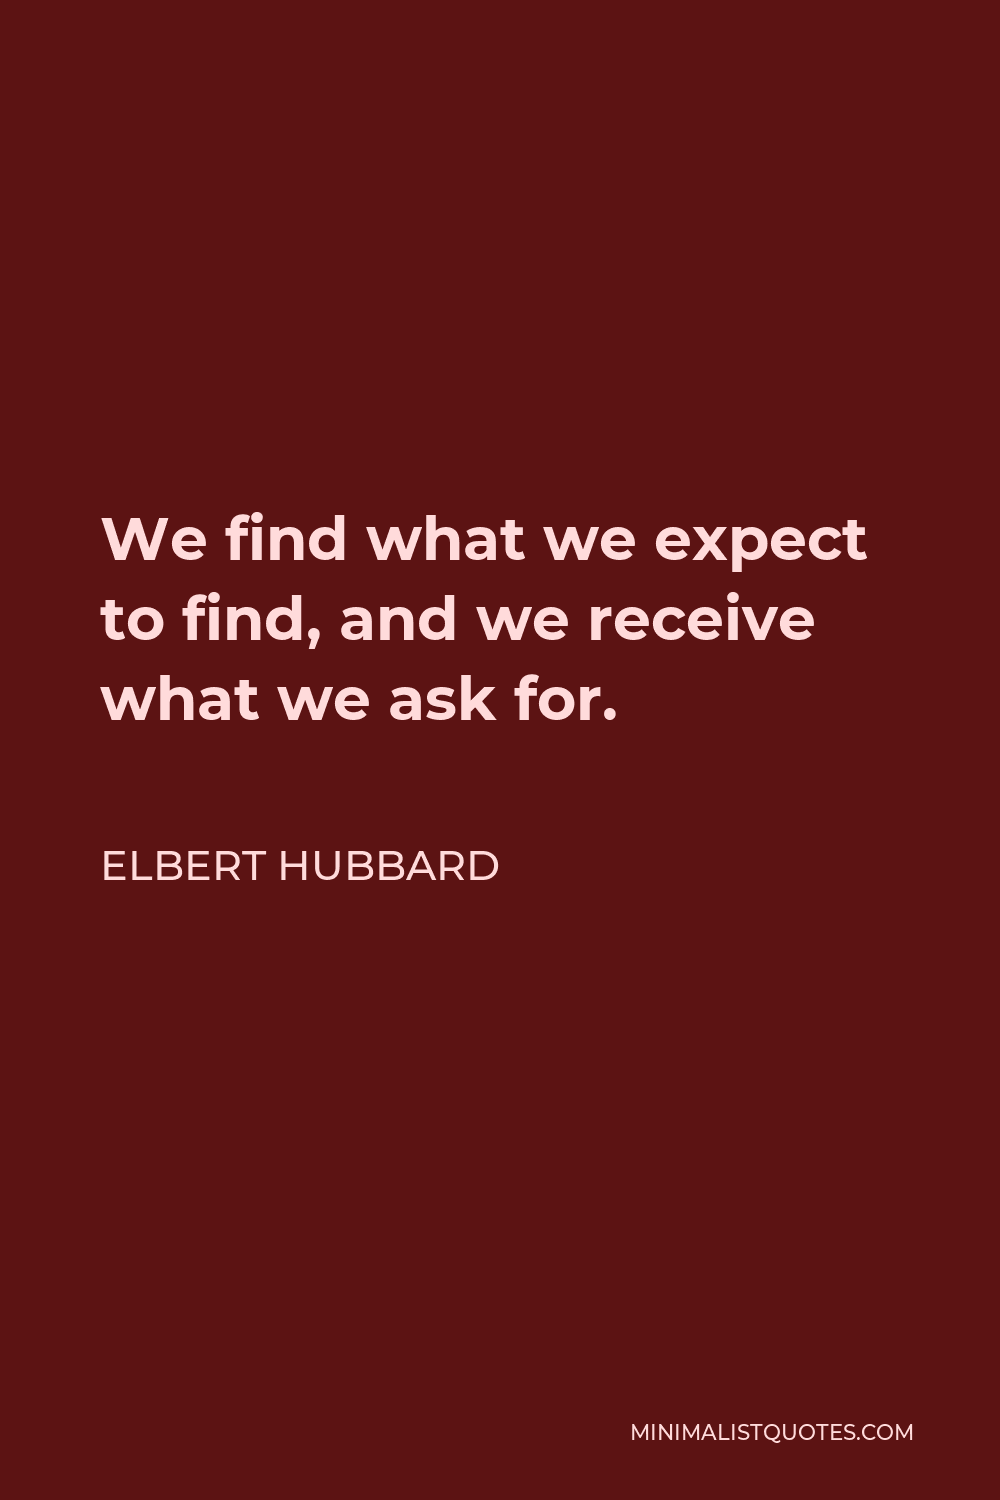 Elbert Hubbard Quote - We find what we expect to find, and we receive what we ask for.